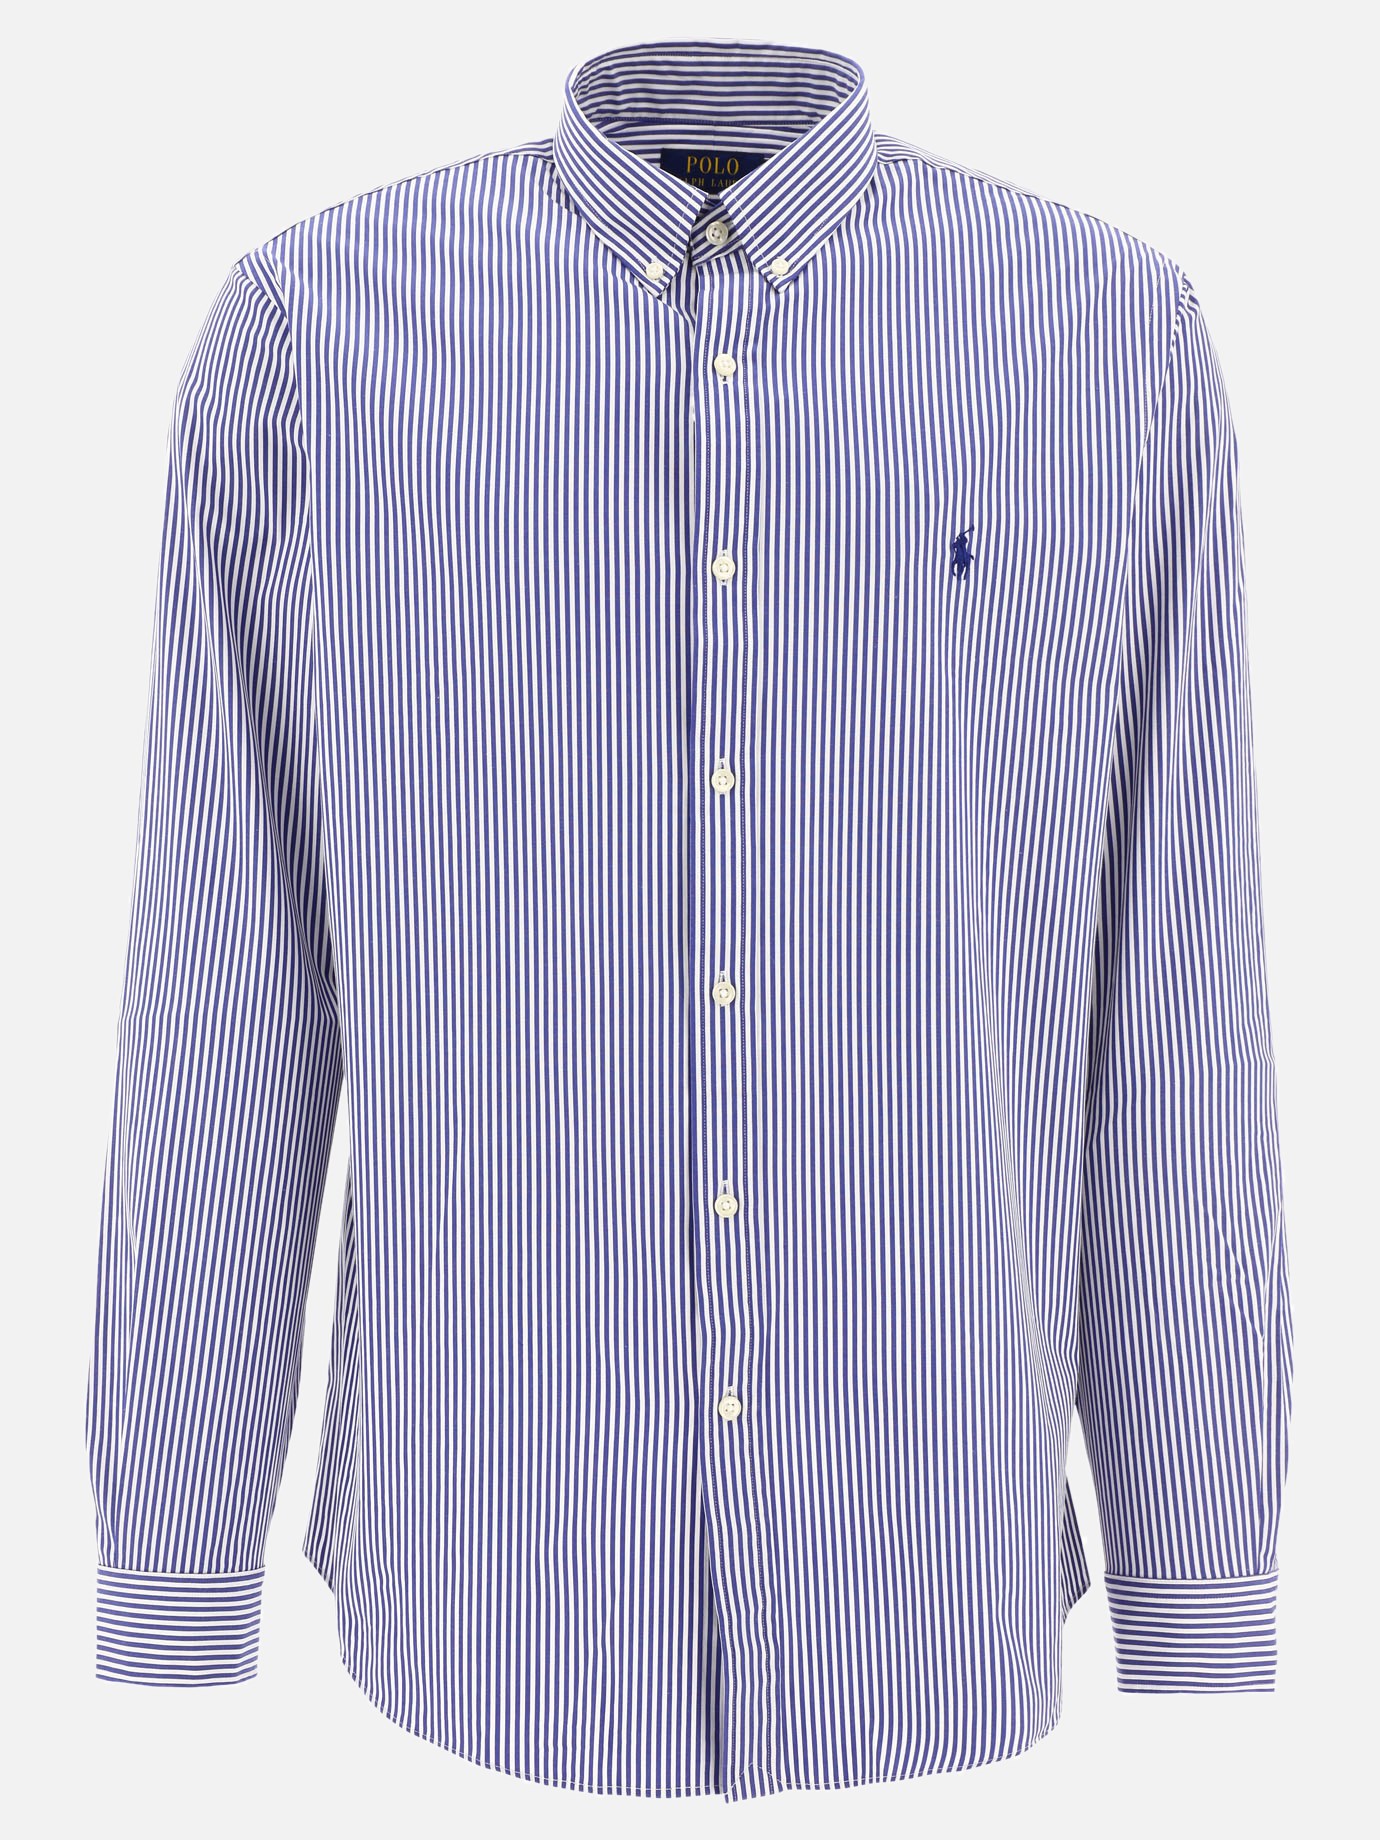 Camicia a righe  Pony by Polo Ralph Lauren - 3